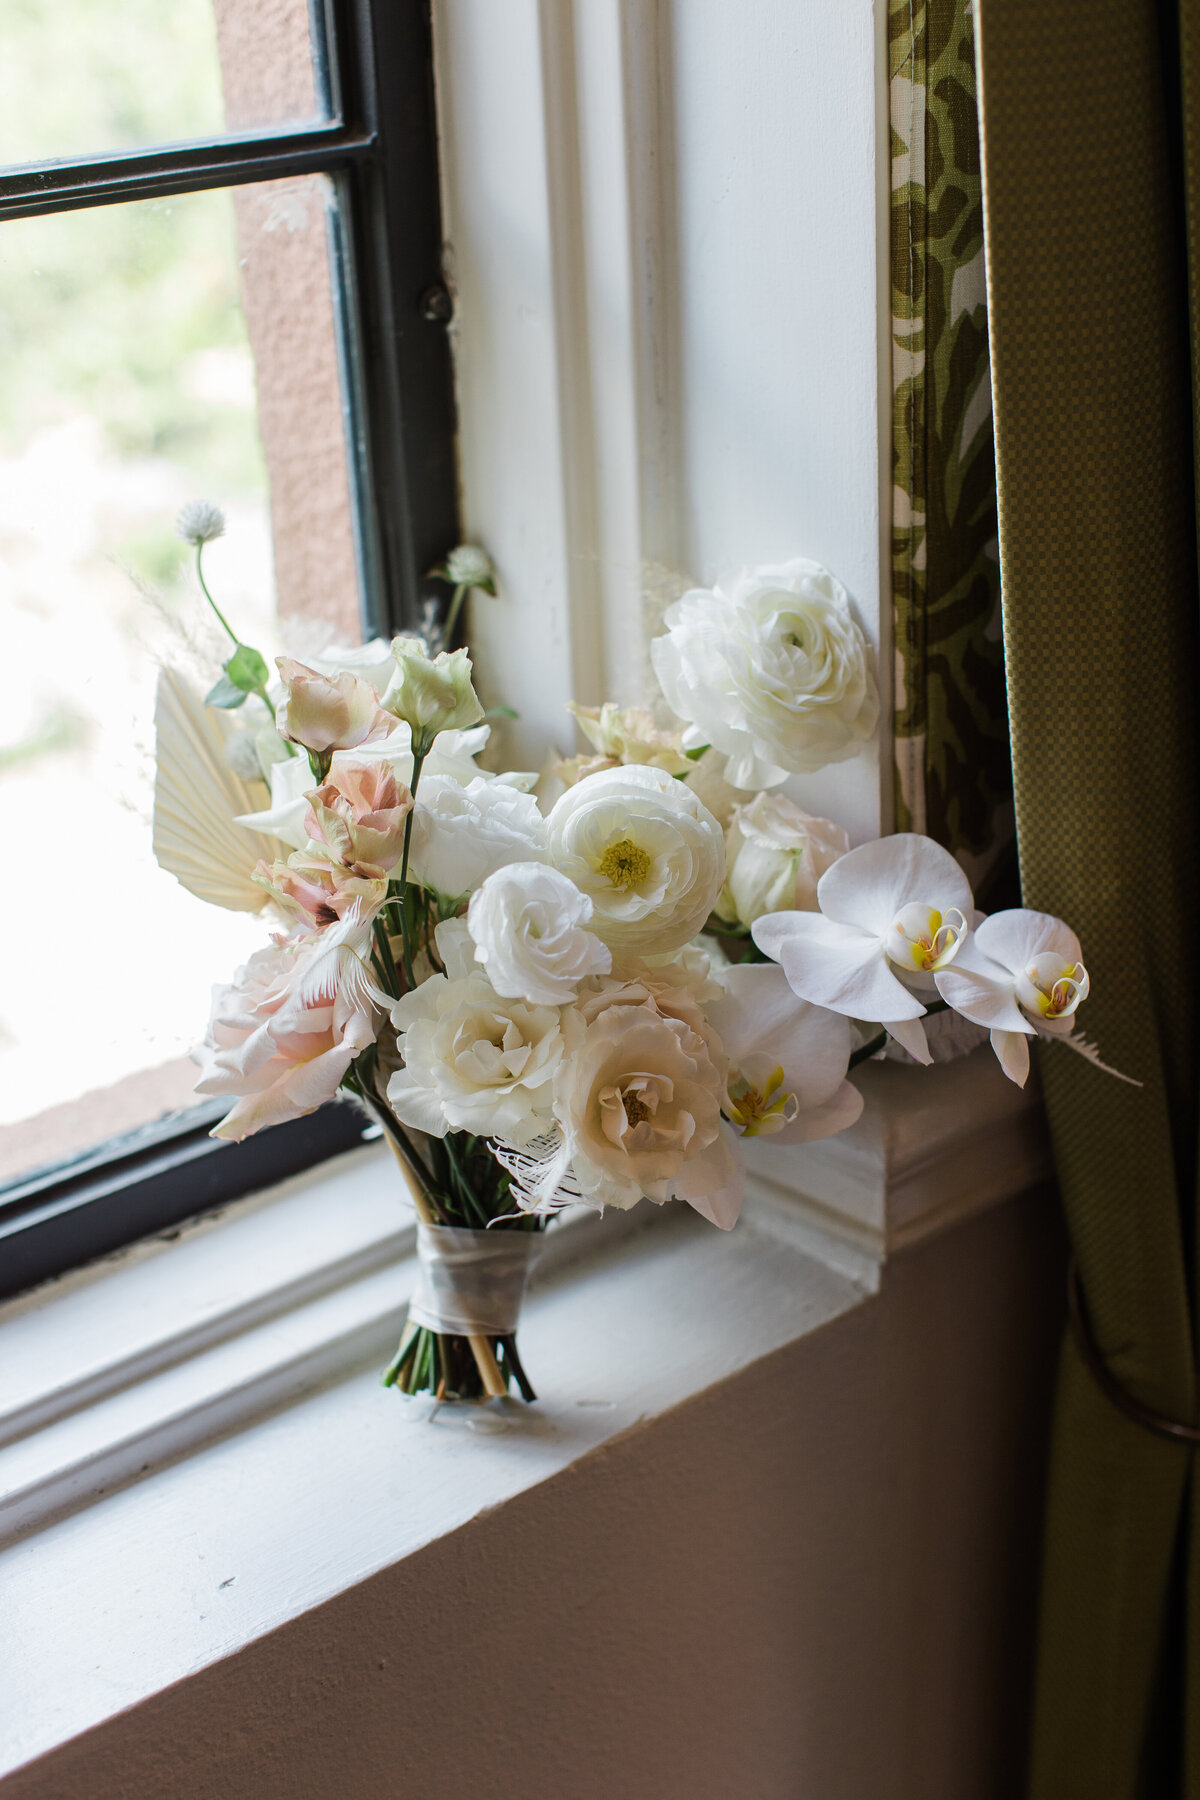 A detail shot of a bridal bouquet for a wedding at the Rosewood Mansion on Turtle Creek in Dallas, Texas. The bouquet is made up of many different types of flowers and contain colors of white, cream, and blush. The bouquet rests on a windowsill next to a intricate set of curtains.